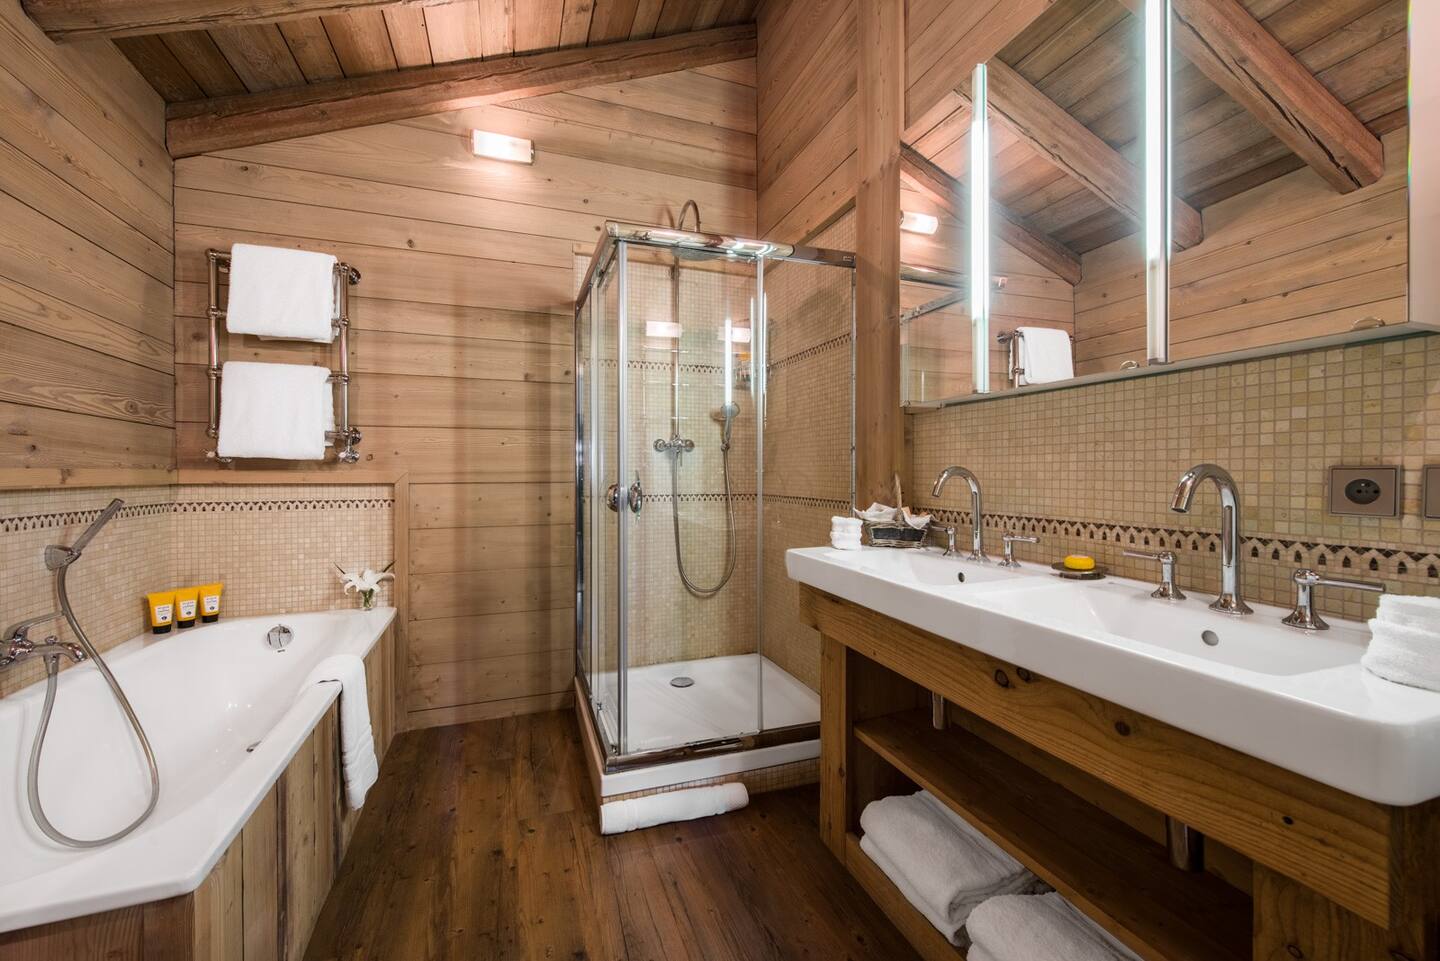 Fully equipped bathroom with a refreshing shower and modern amenities.